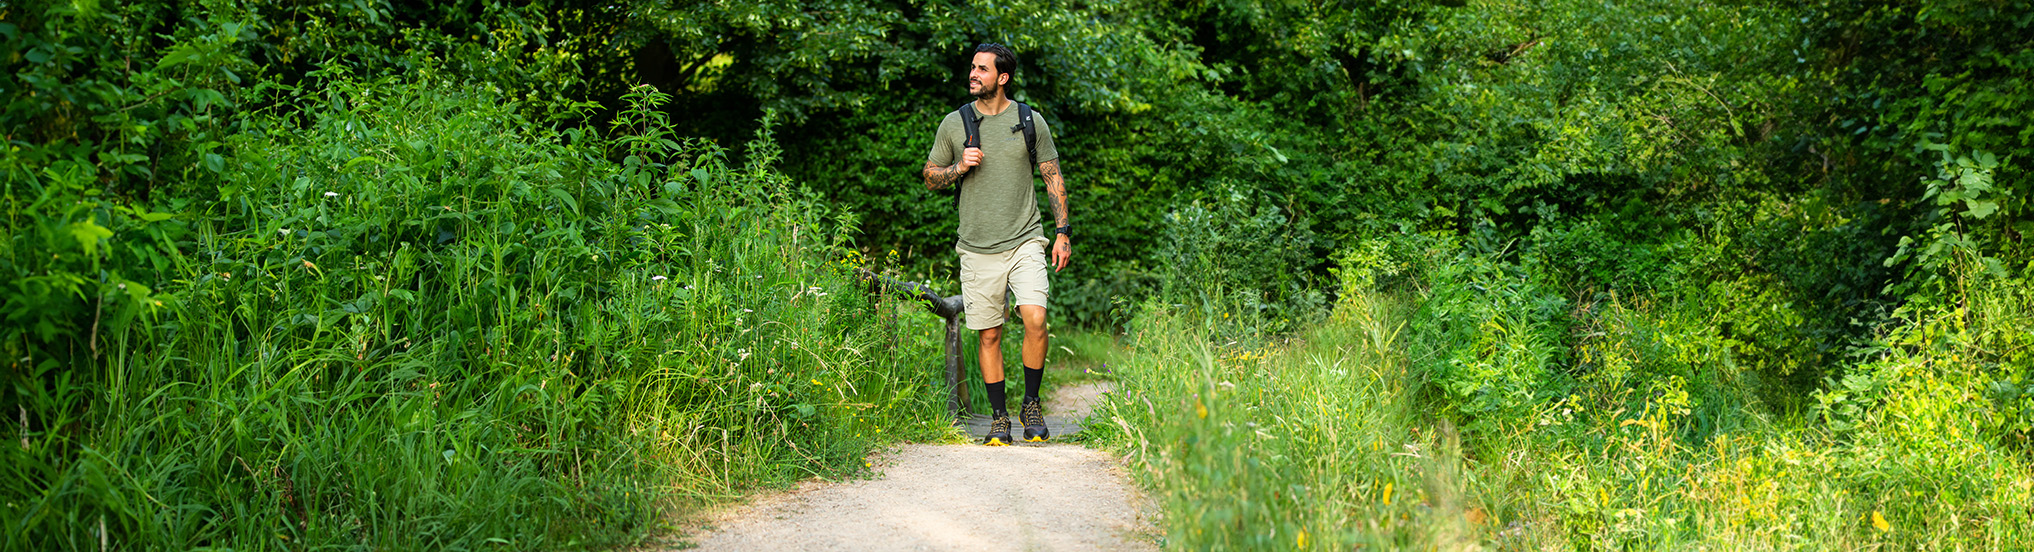 Tips From Hiking Enthusiasts About What to Wear in Hot Weather - Source  Outdoor Blog